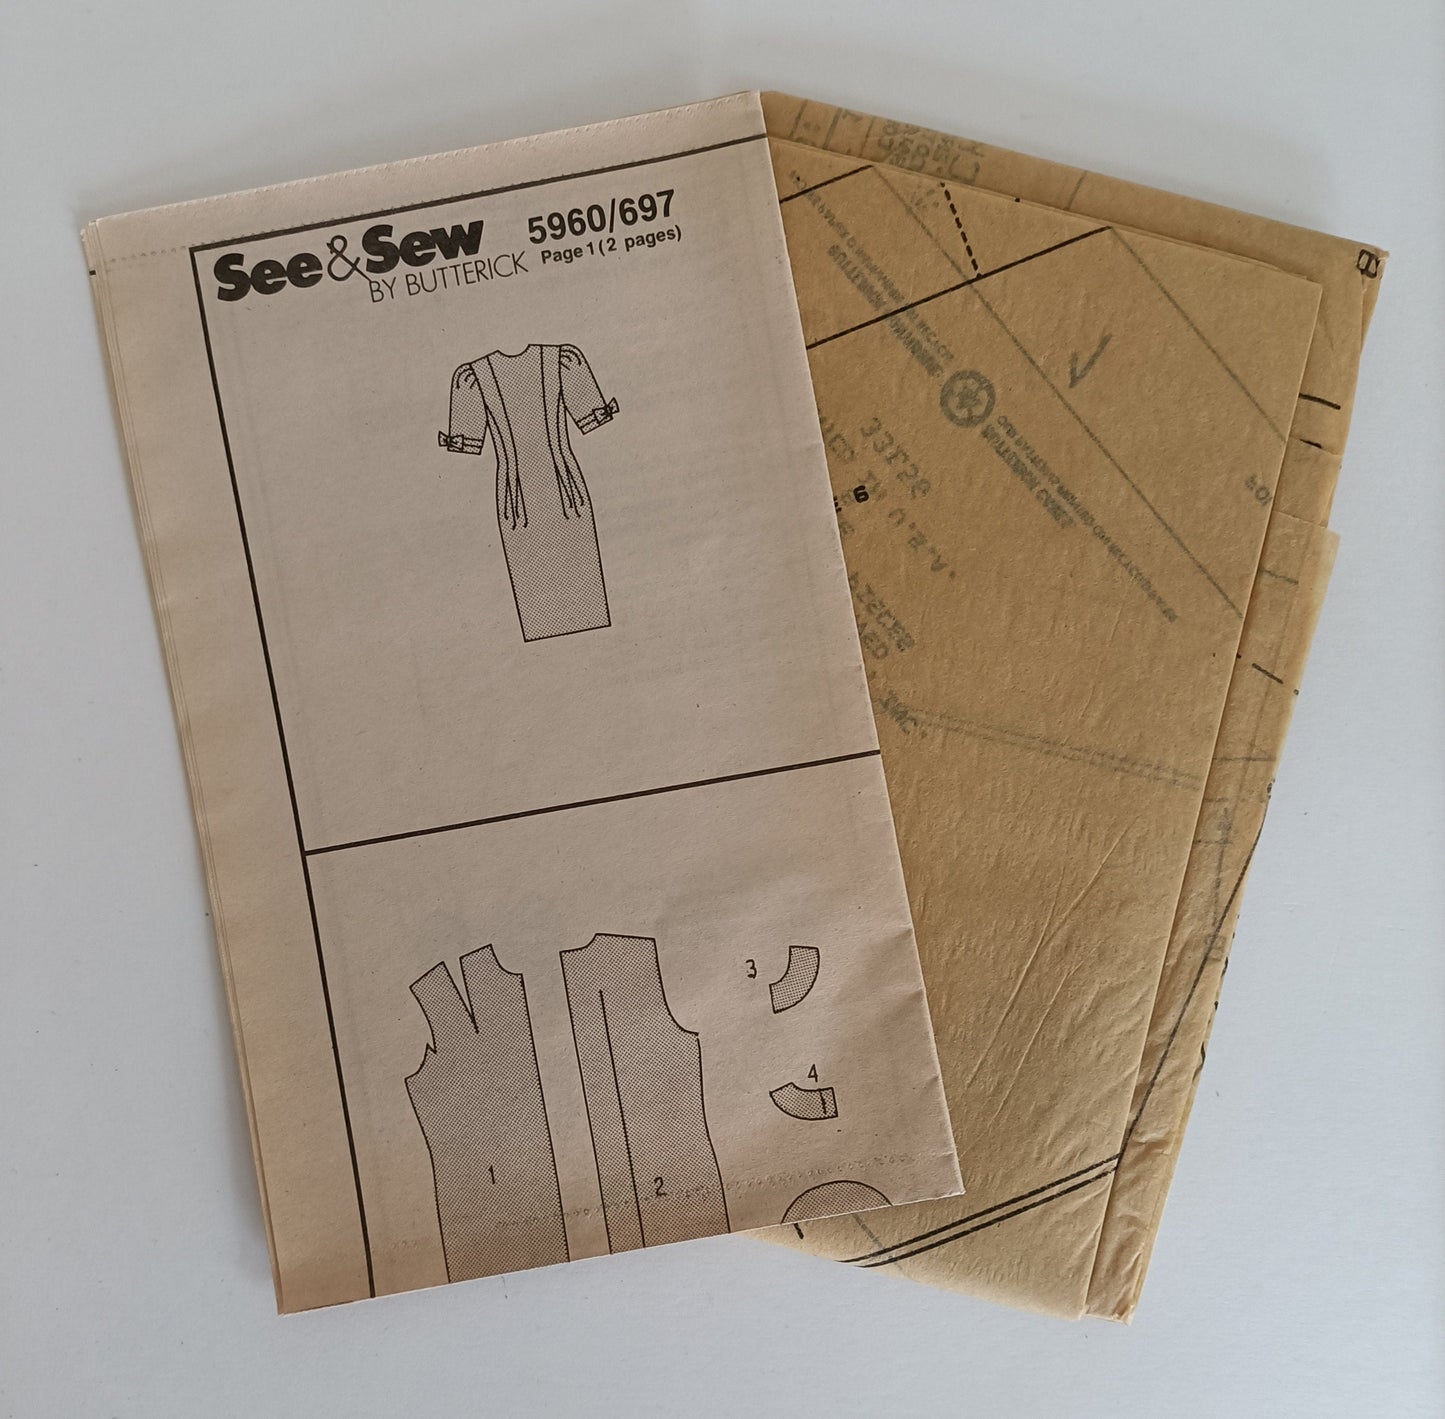 See and Sew 5960 697, misses' petite dress pattern, sizes 6 - 10